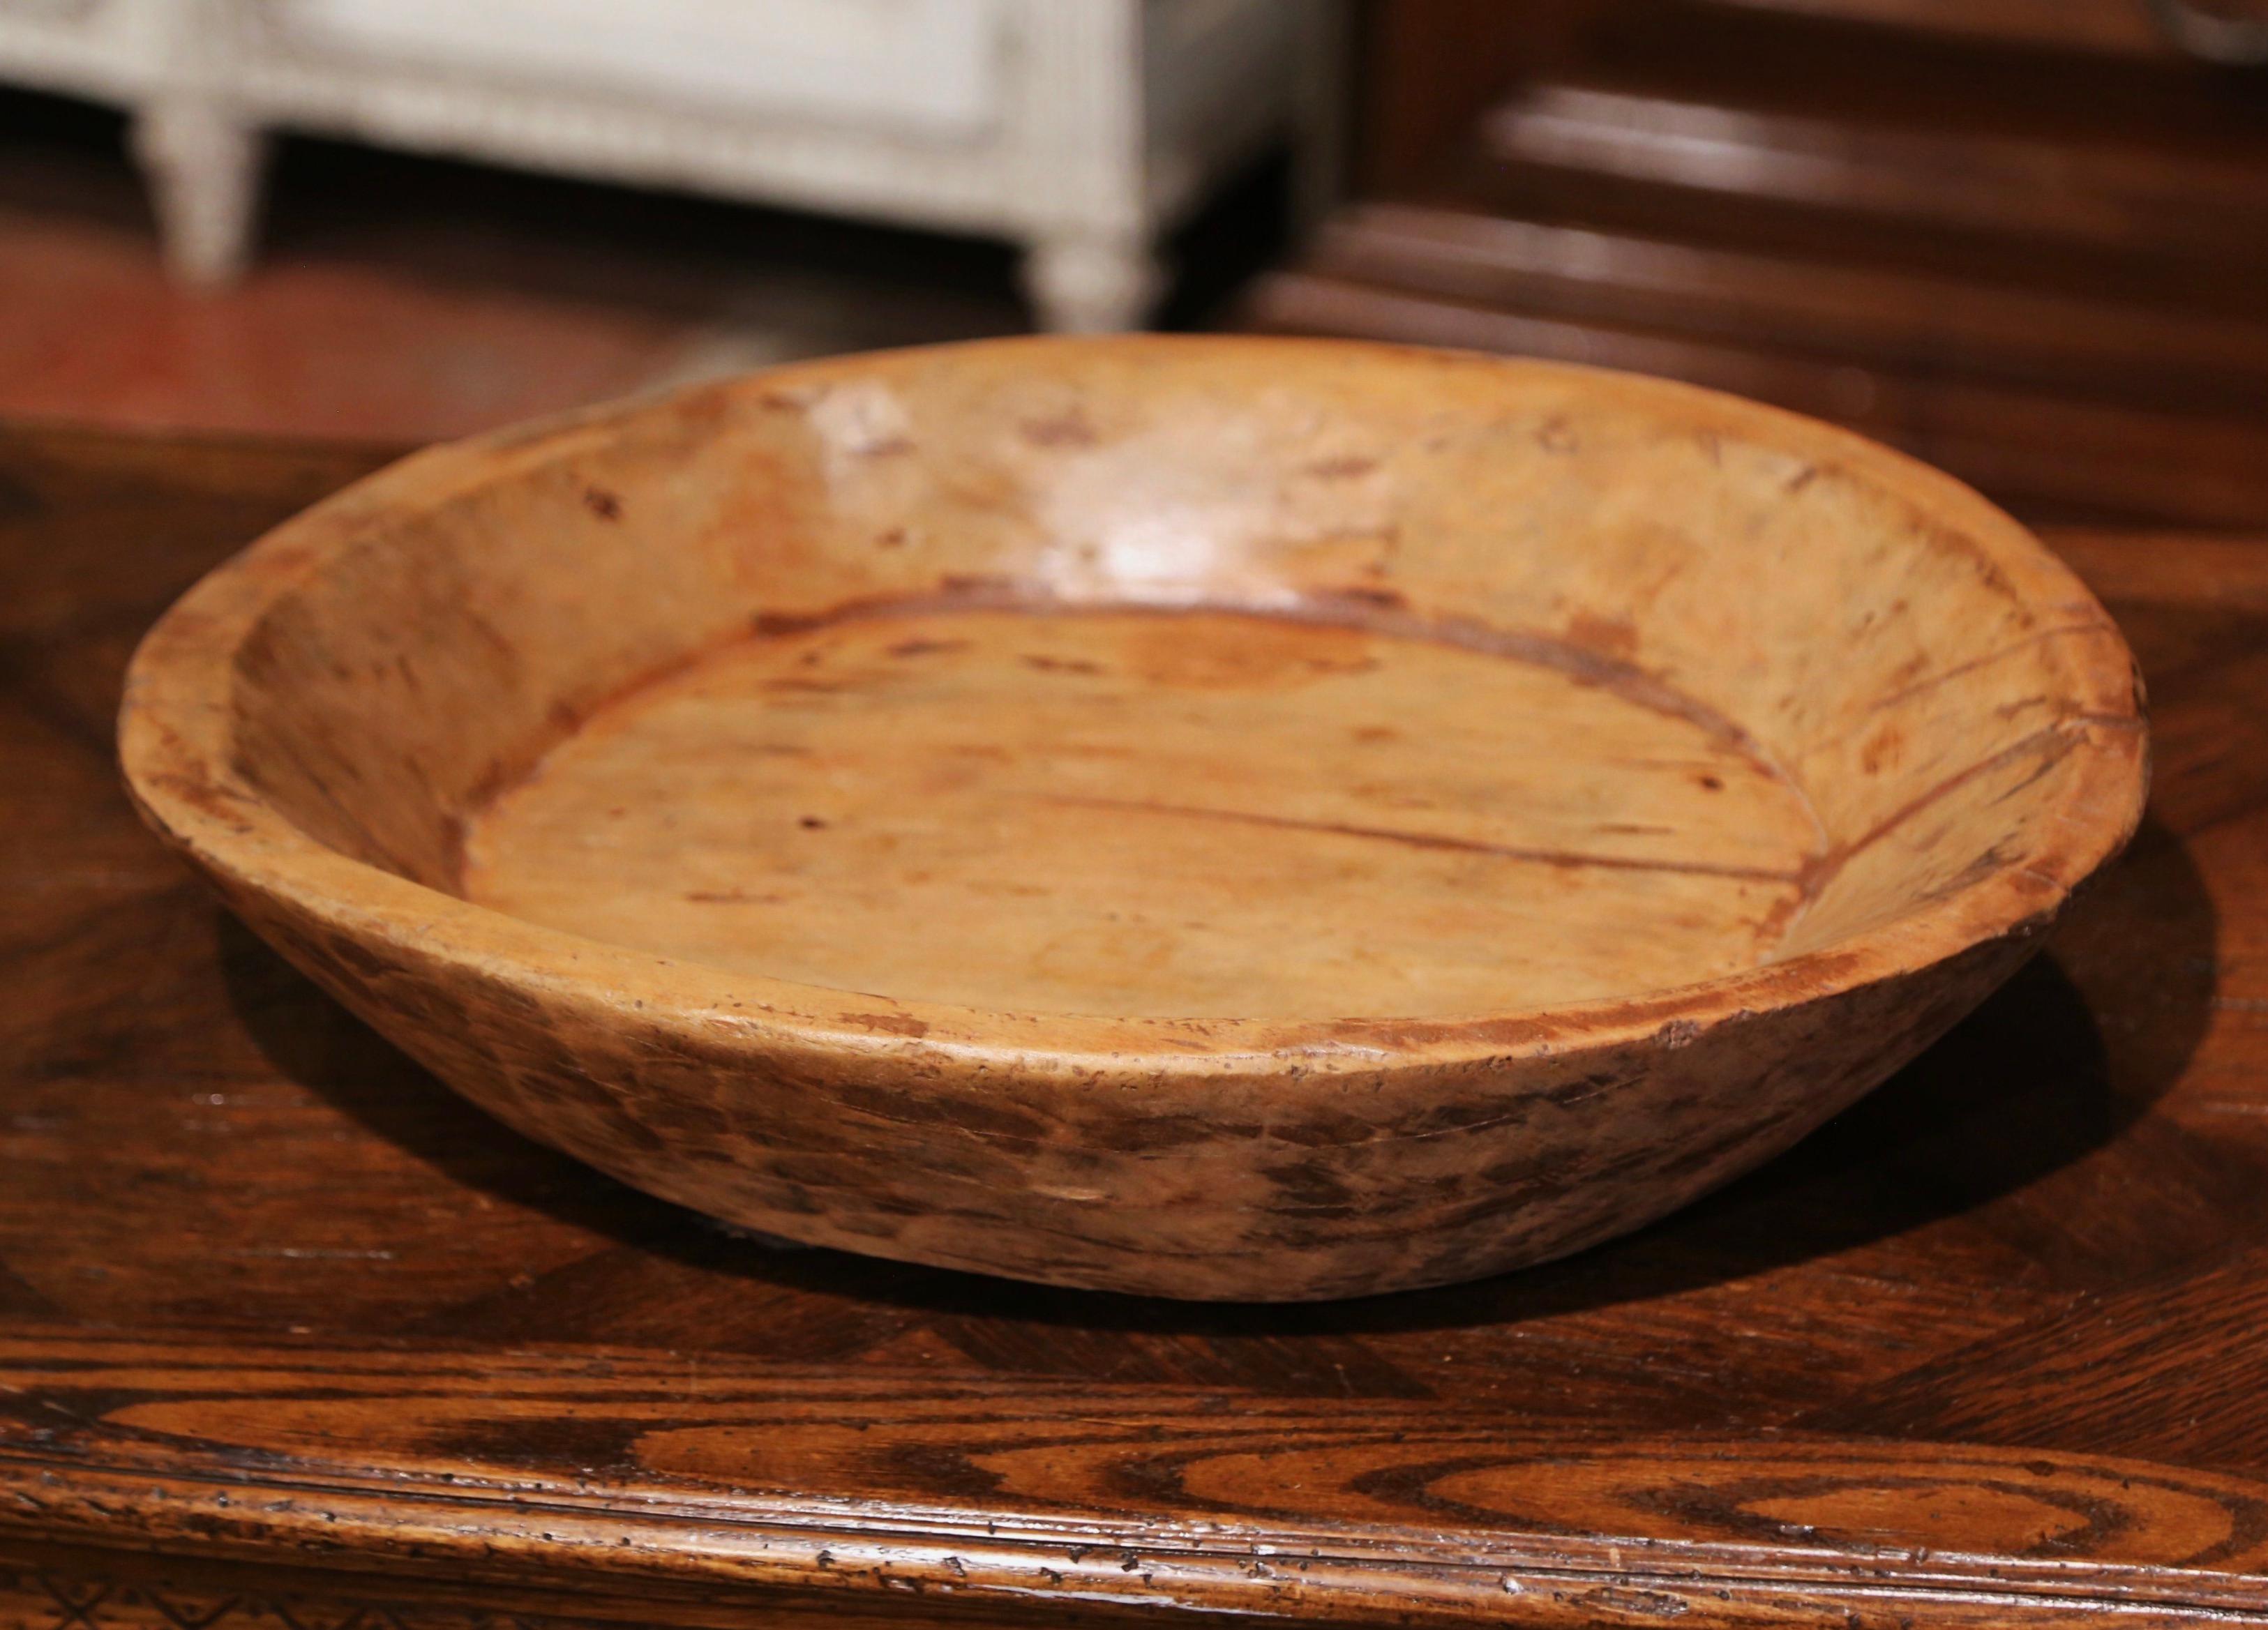 Decorate a dining room table or kitchen counter with this elegant antique center piece filled with fruit or vegetable! Hand carved in France circa 1870 and made of elm wood, the large bowl is almost round in shape and adorns a rich walnut patina.